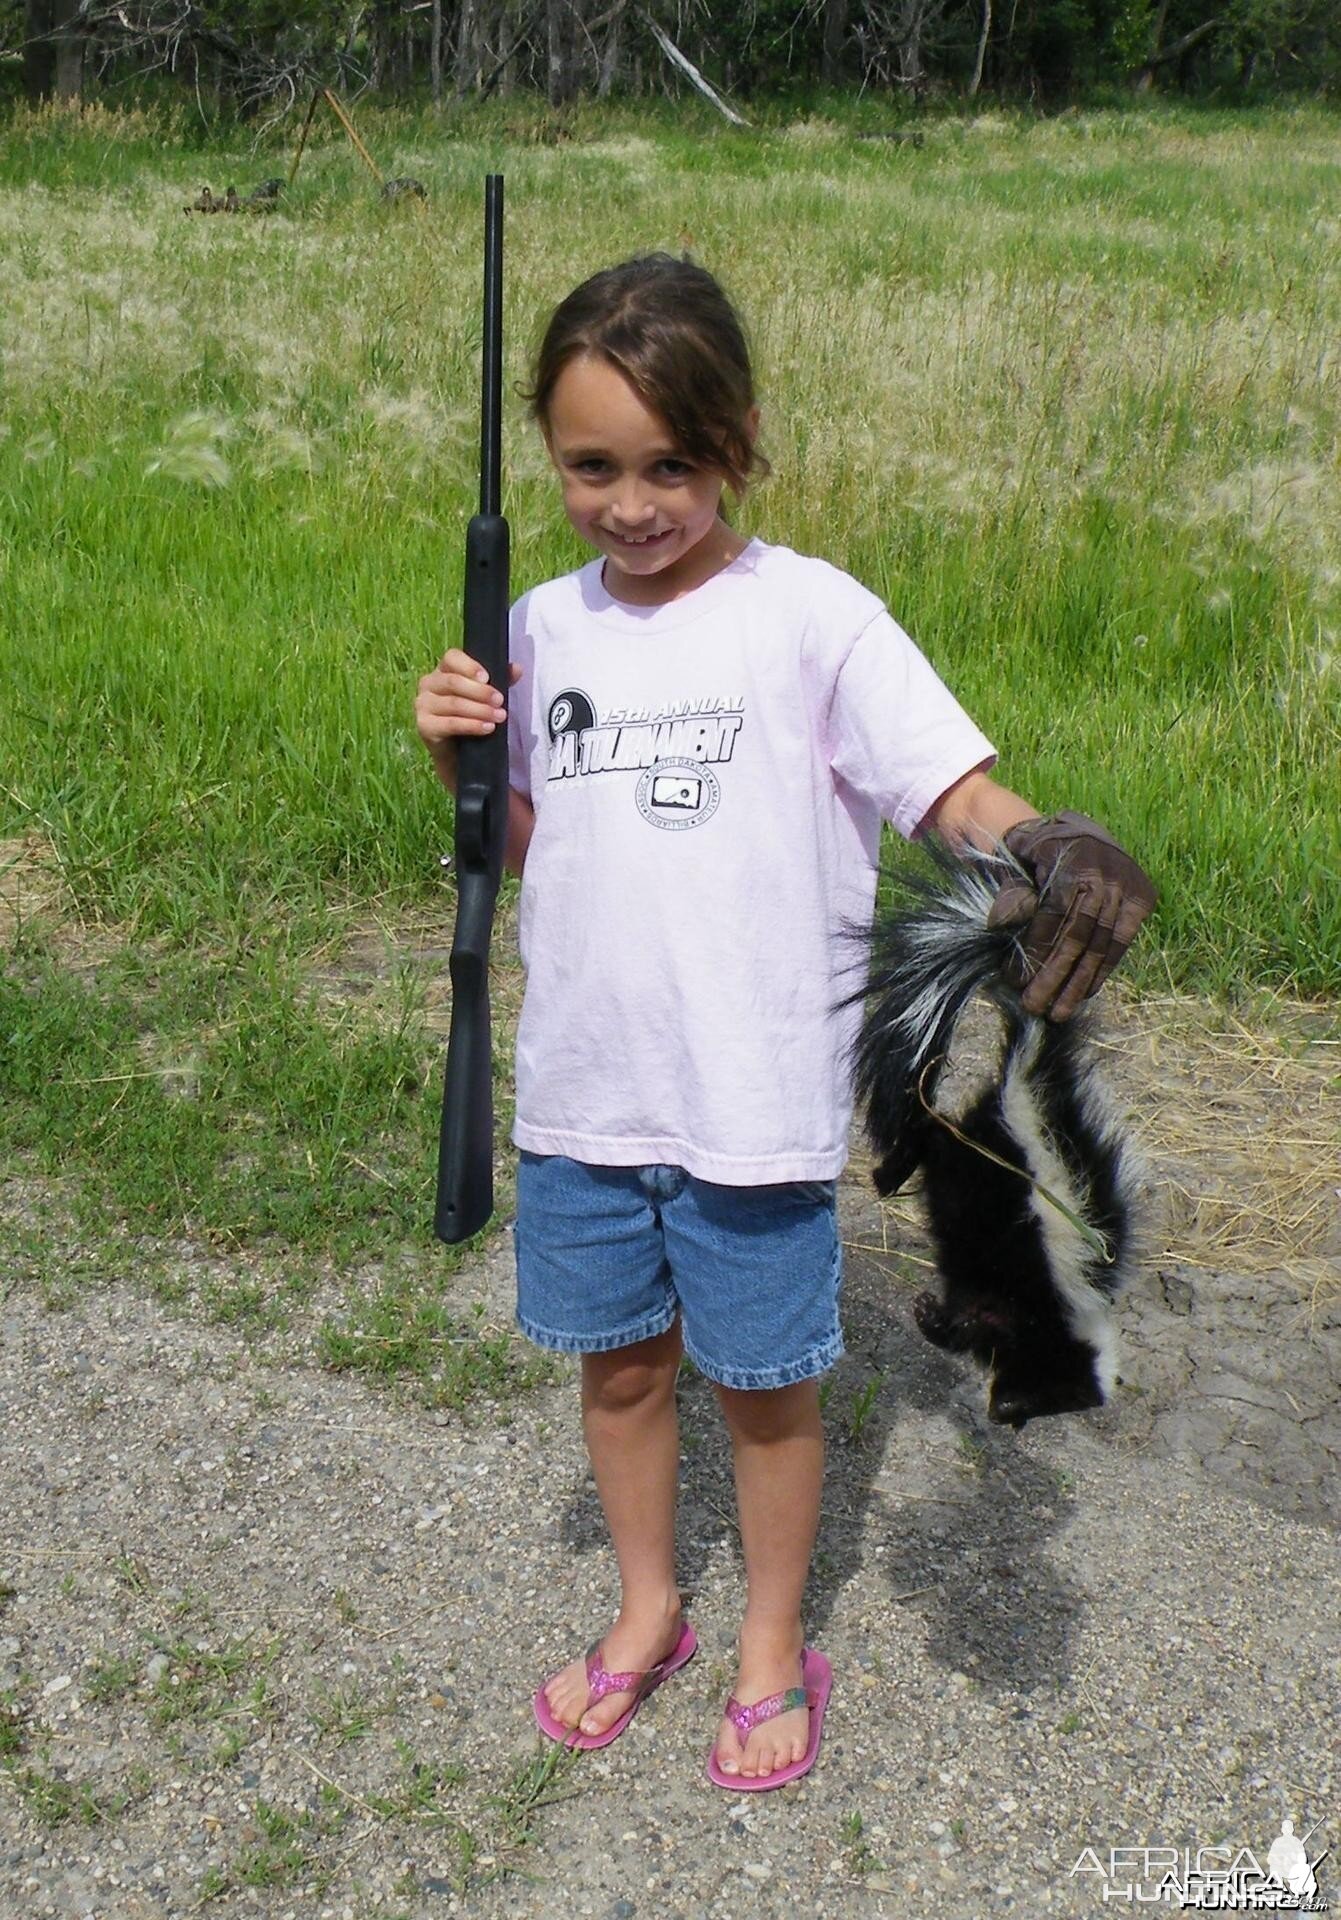 8 year old granddaughters first kill with her new .22, a skunk; PRICELESS